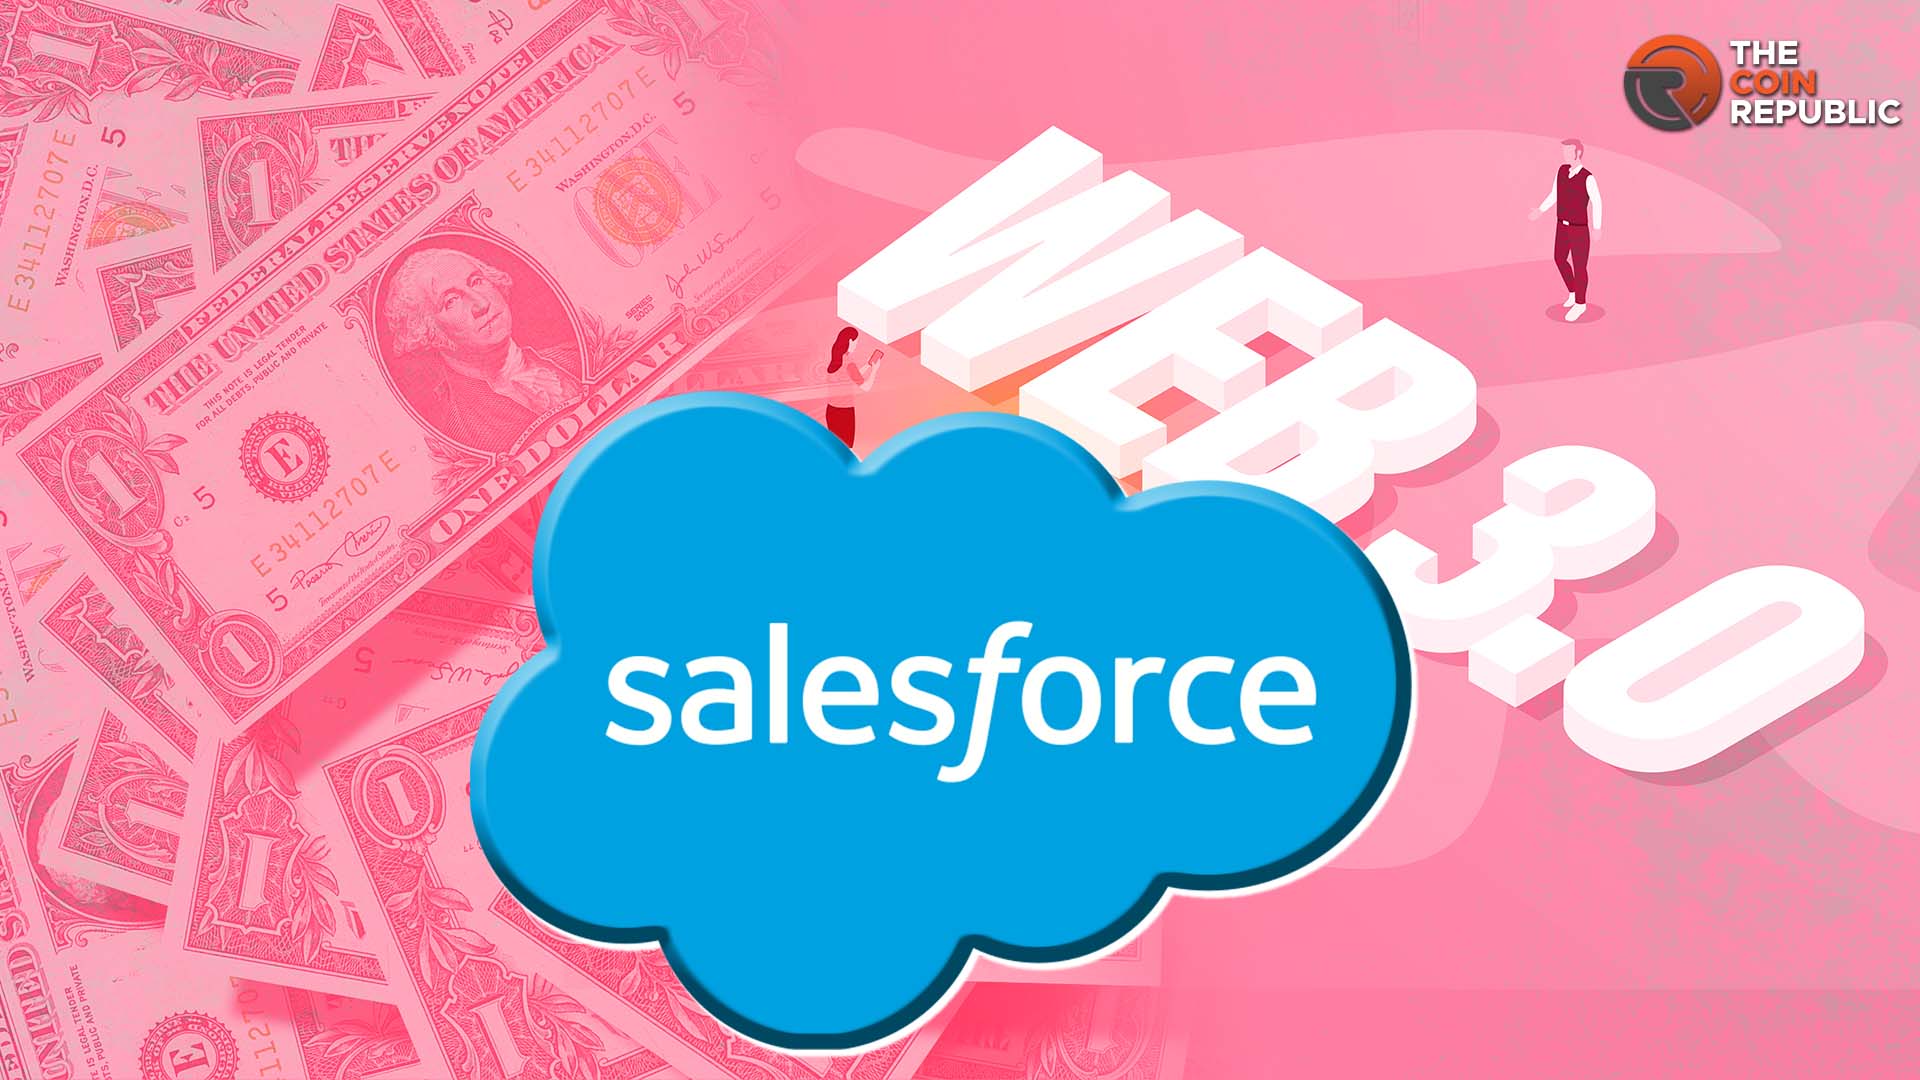 Mnemonic Raised $6M In Salesforce Led Seed Extension Round